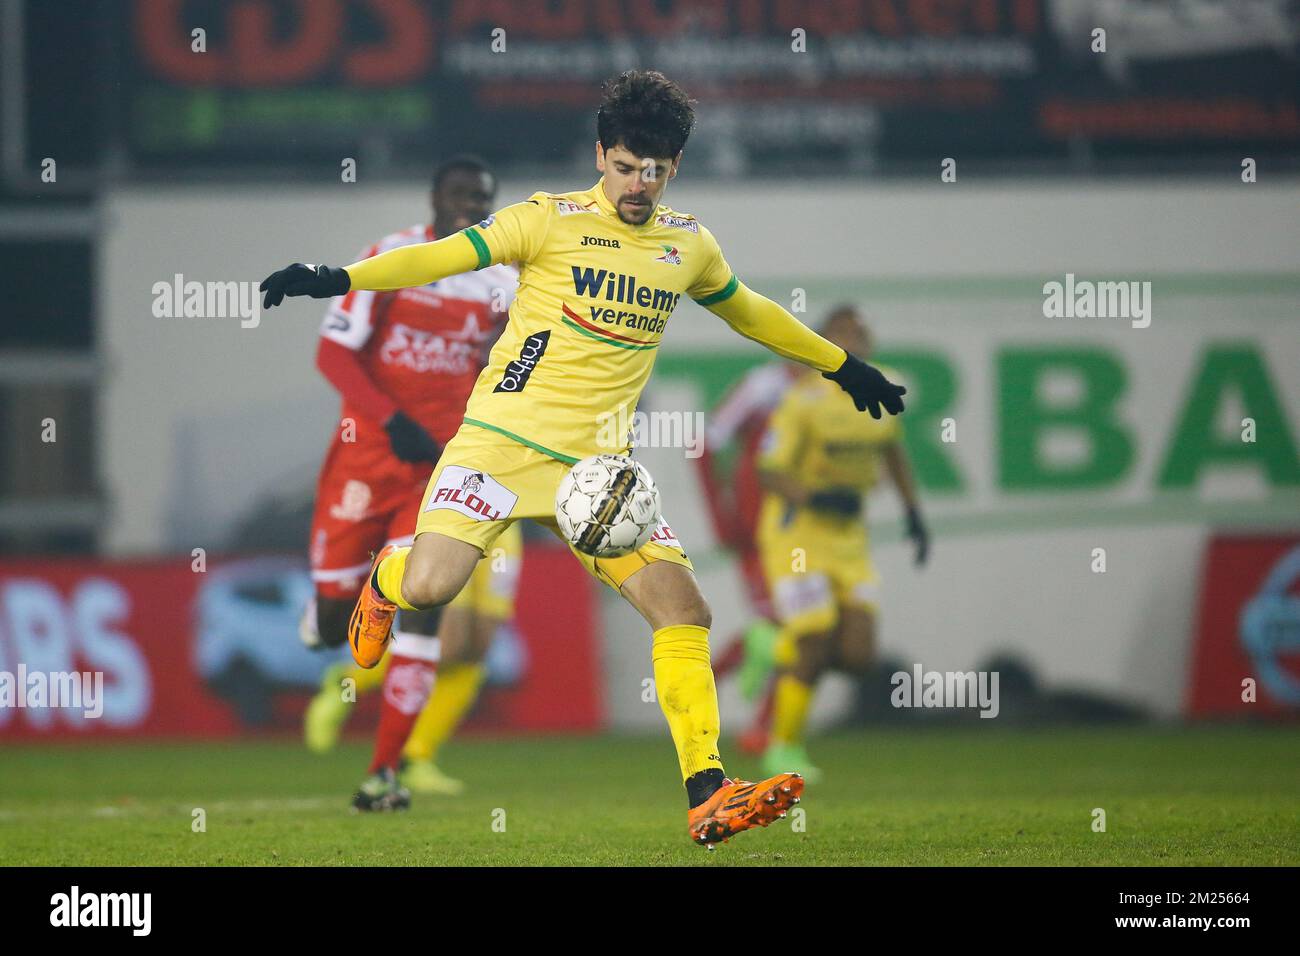 Oostende's Fernando Canesin pictured in action during the Jupiler Pro League match between Mouscron and KV Oostende, in Mouscron, Saturday 11 February 2017, on day 26 of the Belgian soccer championship. BELGA PHOTO BRUNO FAHY Stock Photo